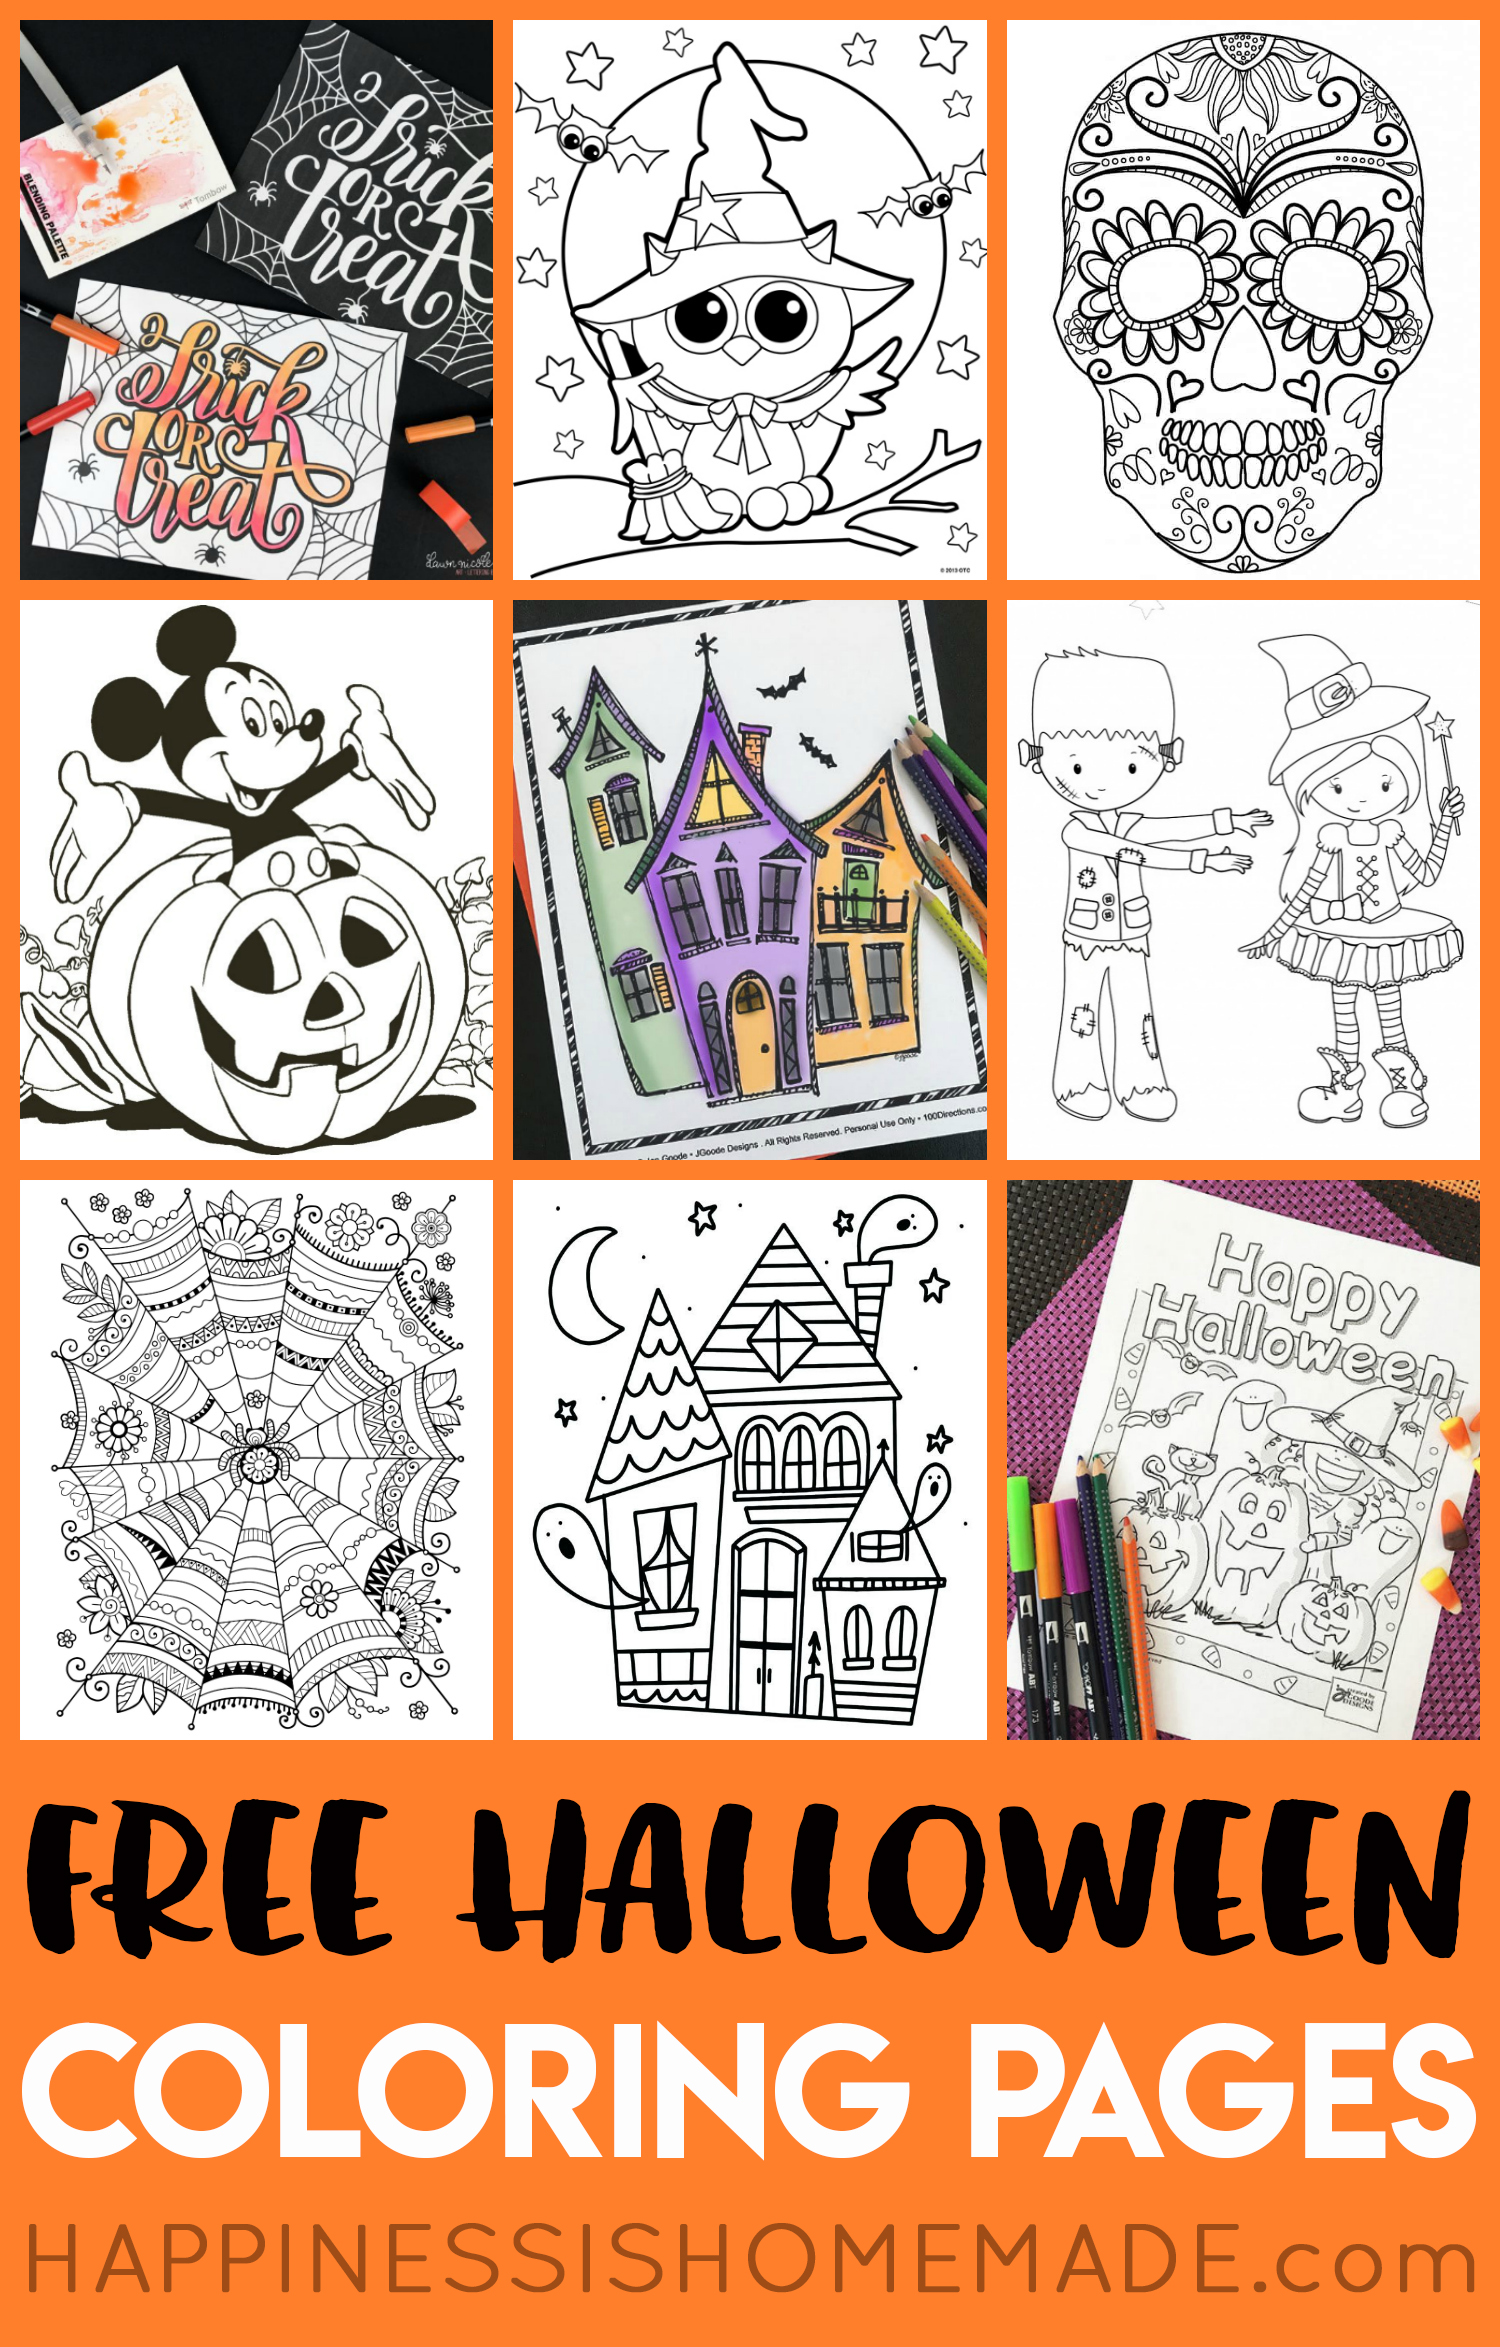 https://www.happinessishomemade.net/wp-content/uploads/2018/09/Free-Halloween-Coloring-Page-Printables.jpg